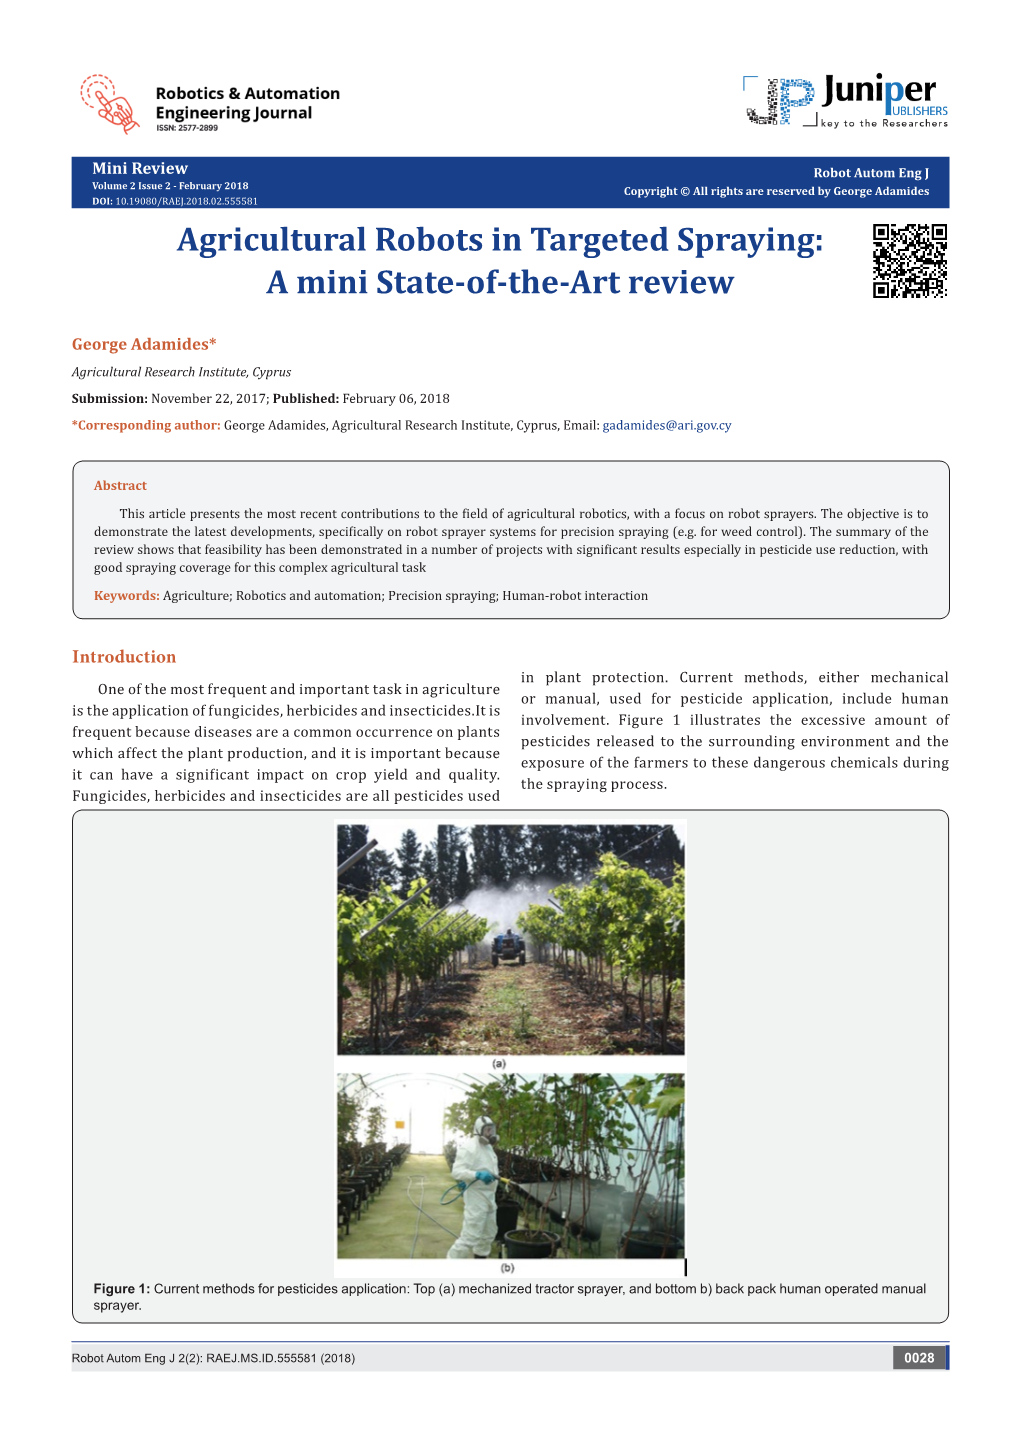 Agricultural Robots in Targeted Spraying: a Mini State-Of-The-Art Review